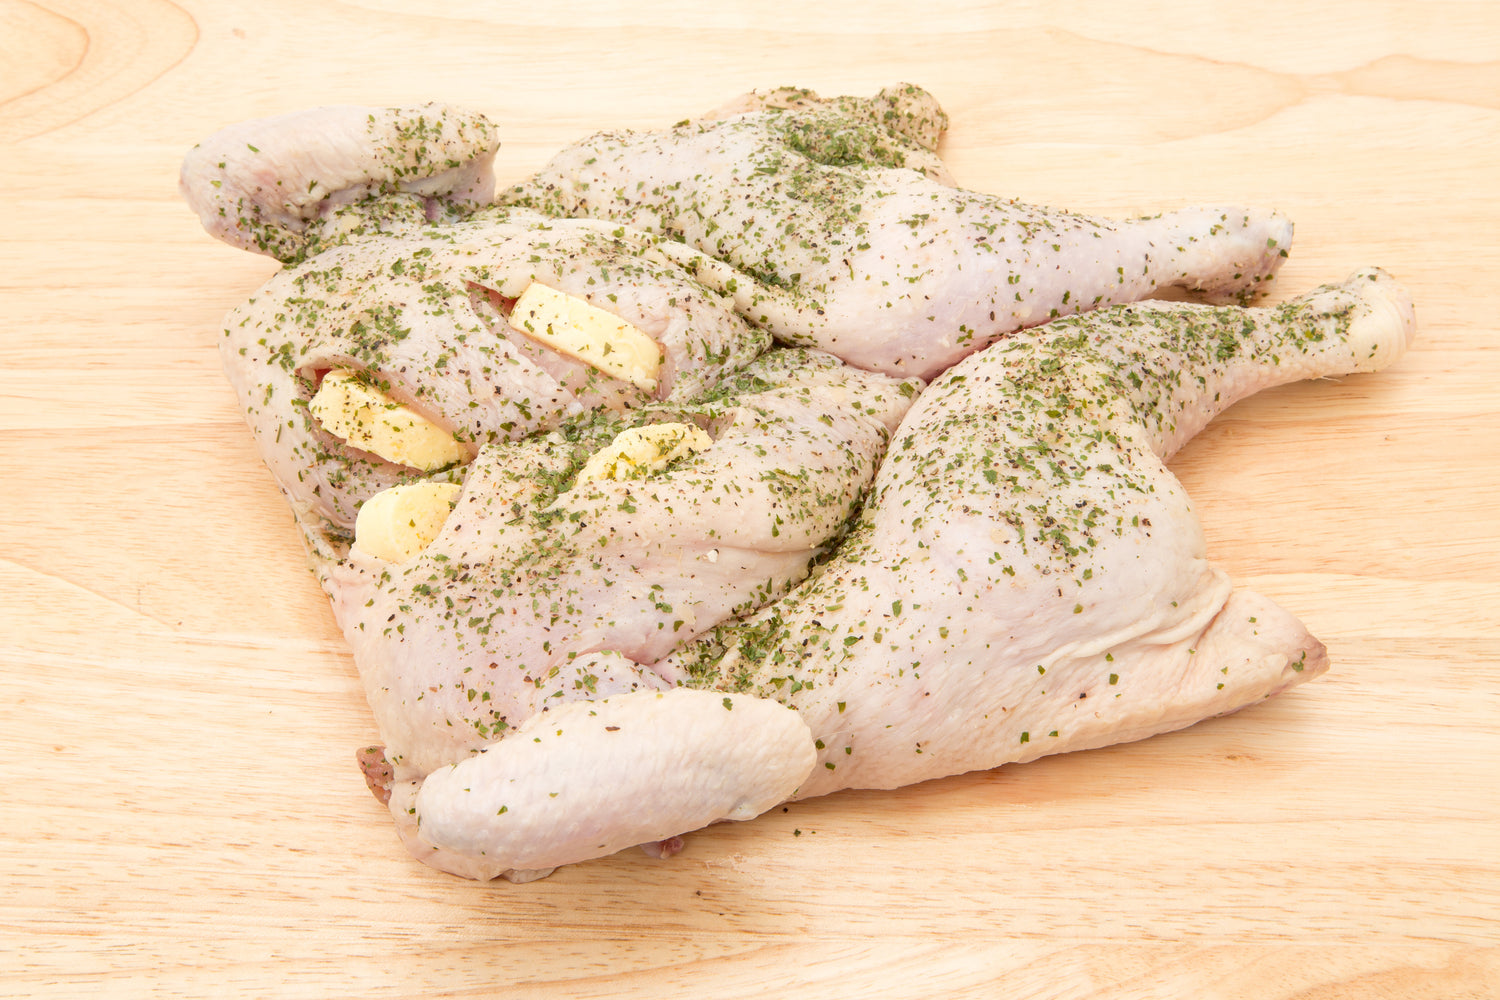 raw spatchcock chicken on a wooden board with herbs and butter